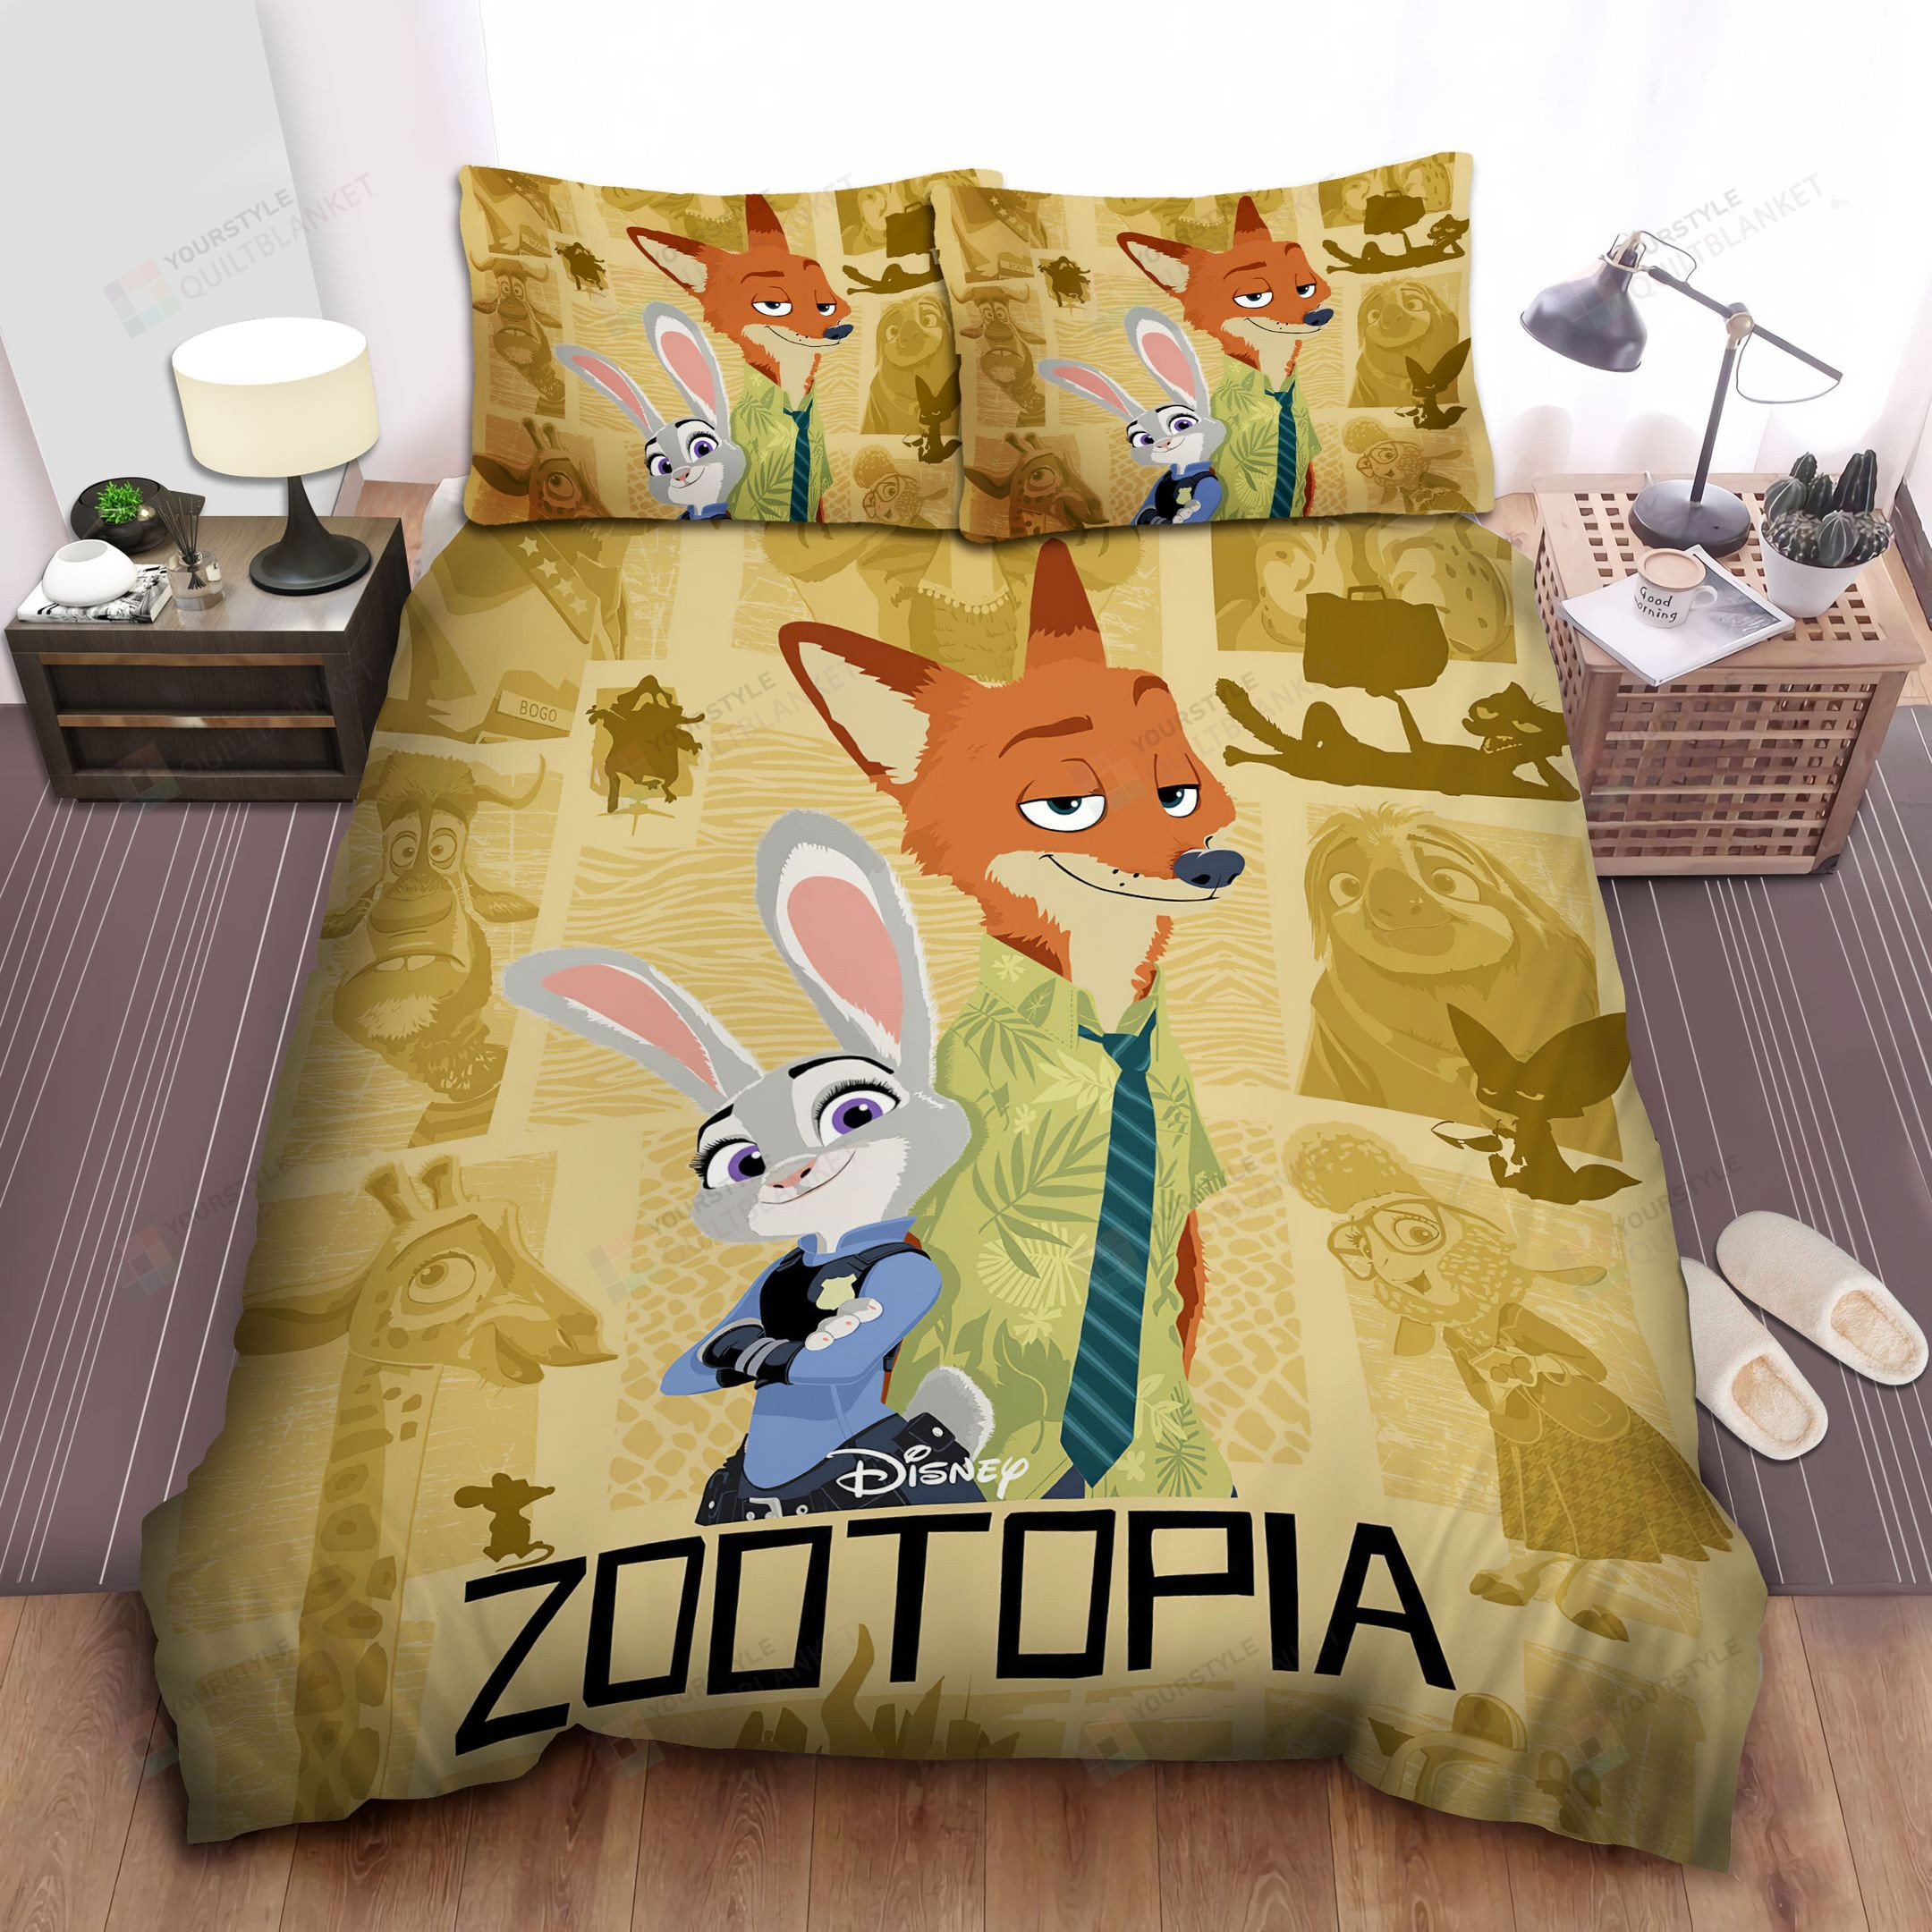 zootopia nick and judy digital illustration movie poster bed sheets spread comforter duvet cover bedding sets 2144 wk1m5